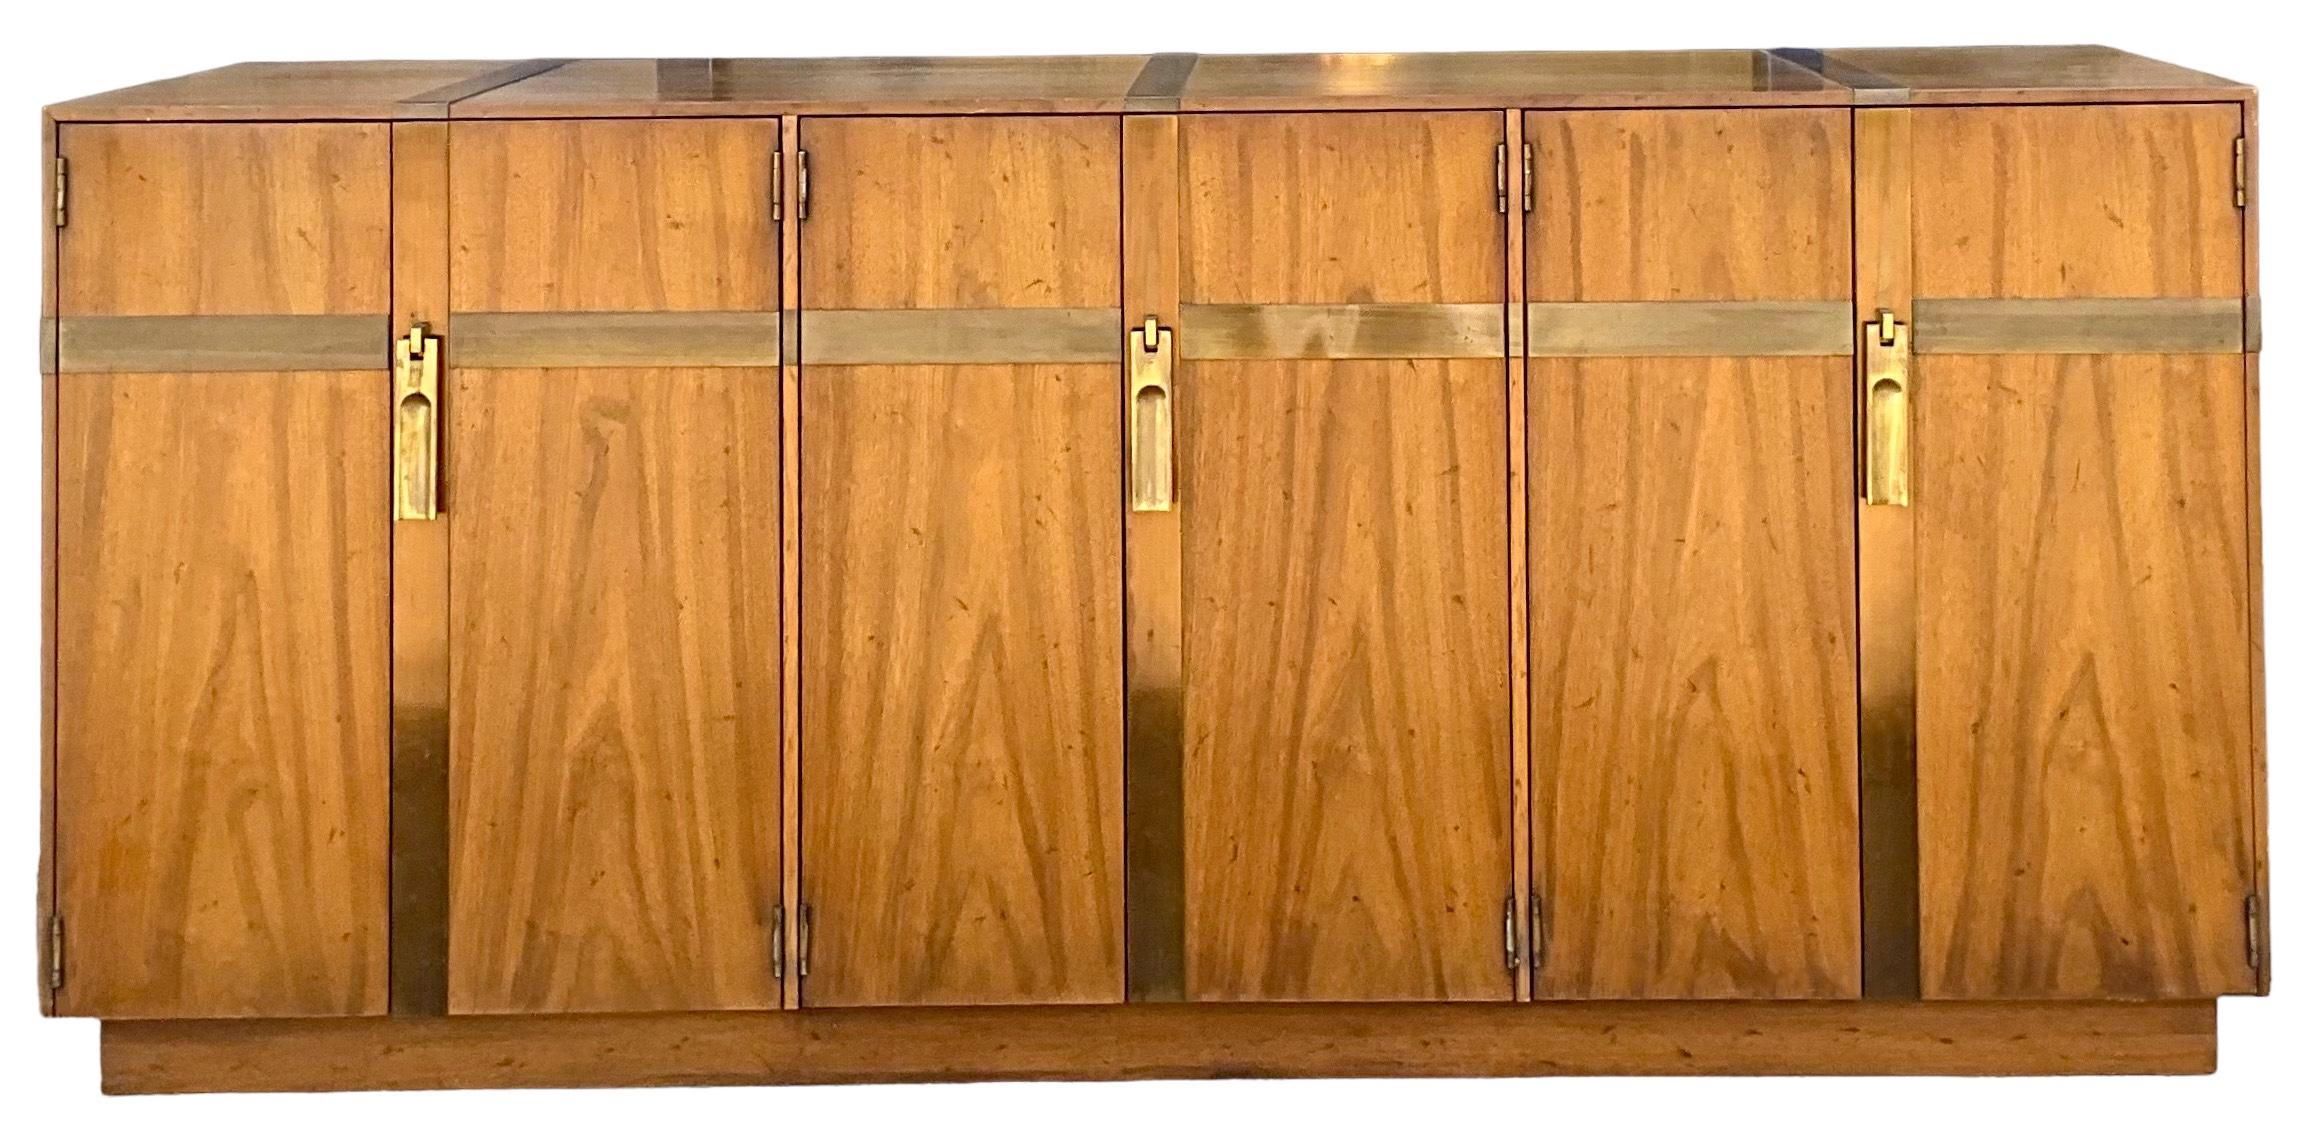 I love this! It is a mid-century modern brass bound walnut credenza by Heritage. It opens to three sections of storage. It is in very good vintage condition.

